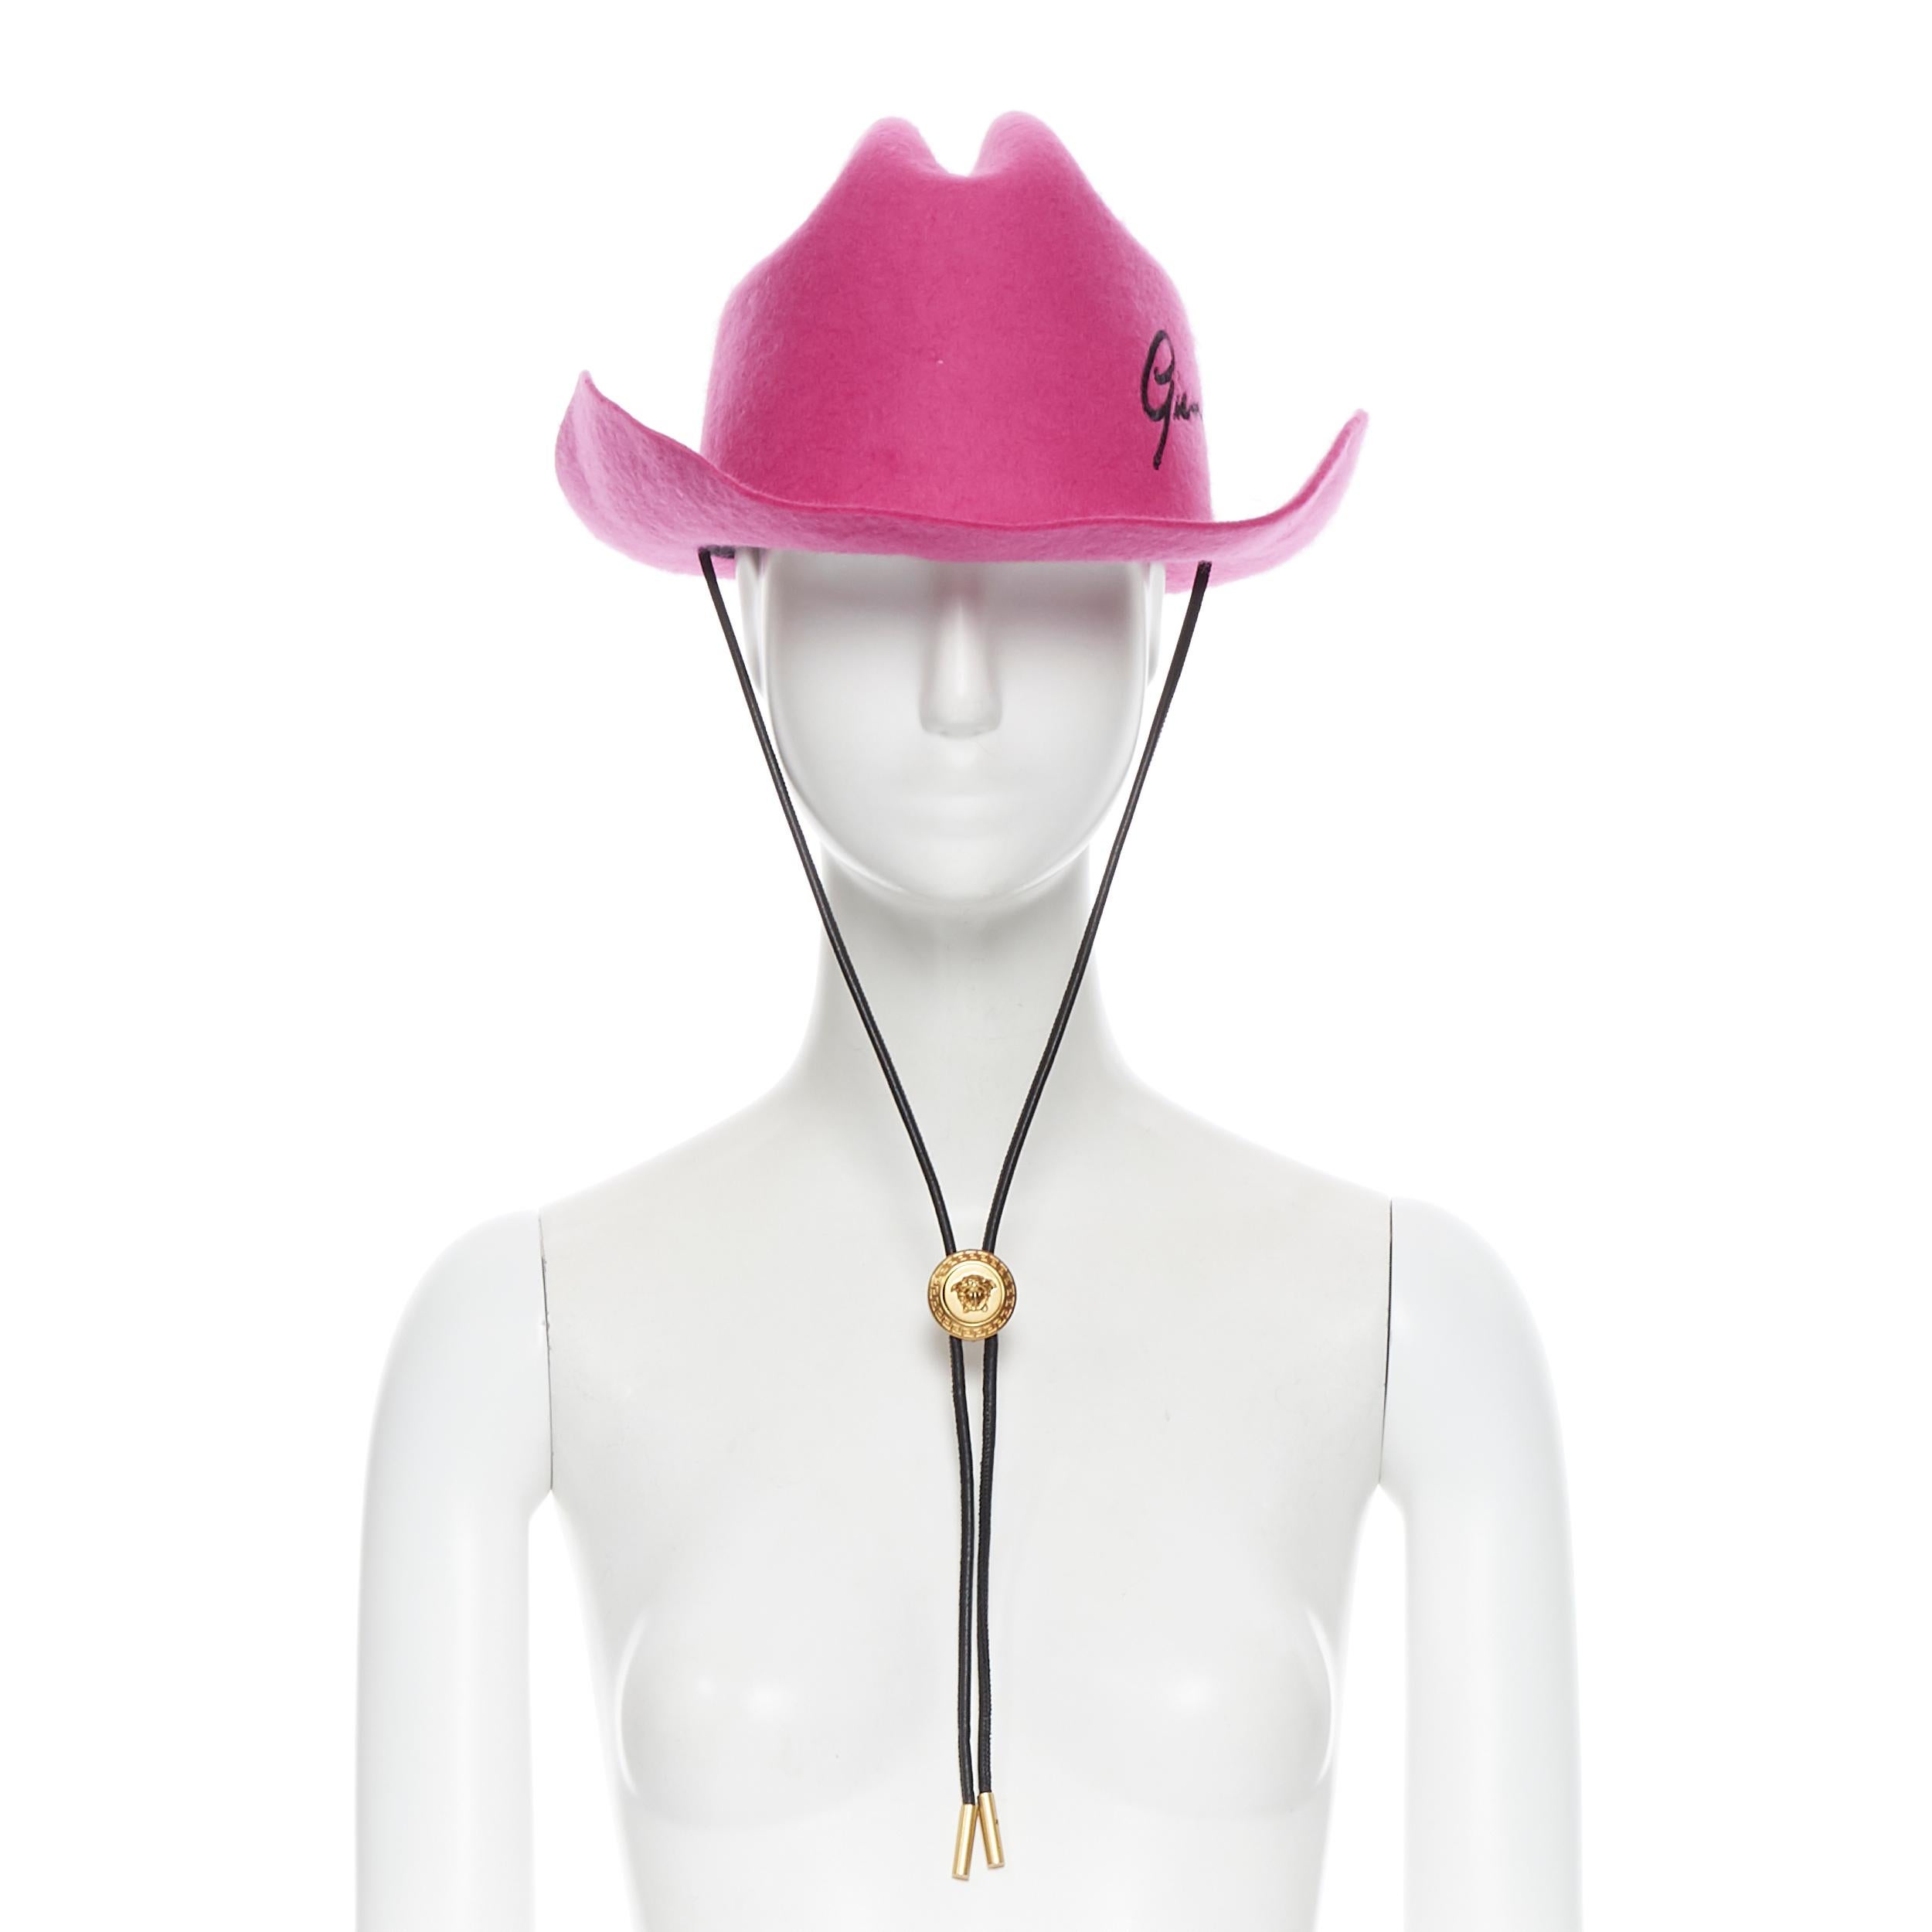 new VERSACE 2020 Runway Gianni GV Signature pink wool Medusa cowboy hat EU57 Reference: TGAS/B01475 
Brand: Versace
Designer: Donatella Versace 
Collection: 2020 Runway 
Material: Wool 
Color: Pink 
Pattern: Solid 
Extra Detail: Fuschia pink hat